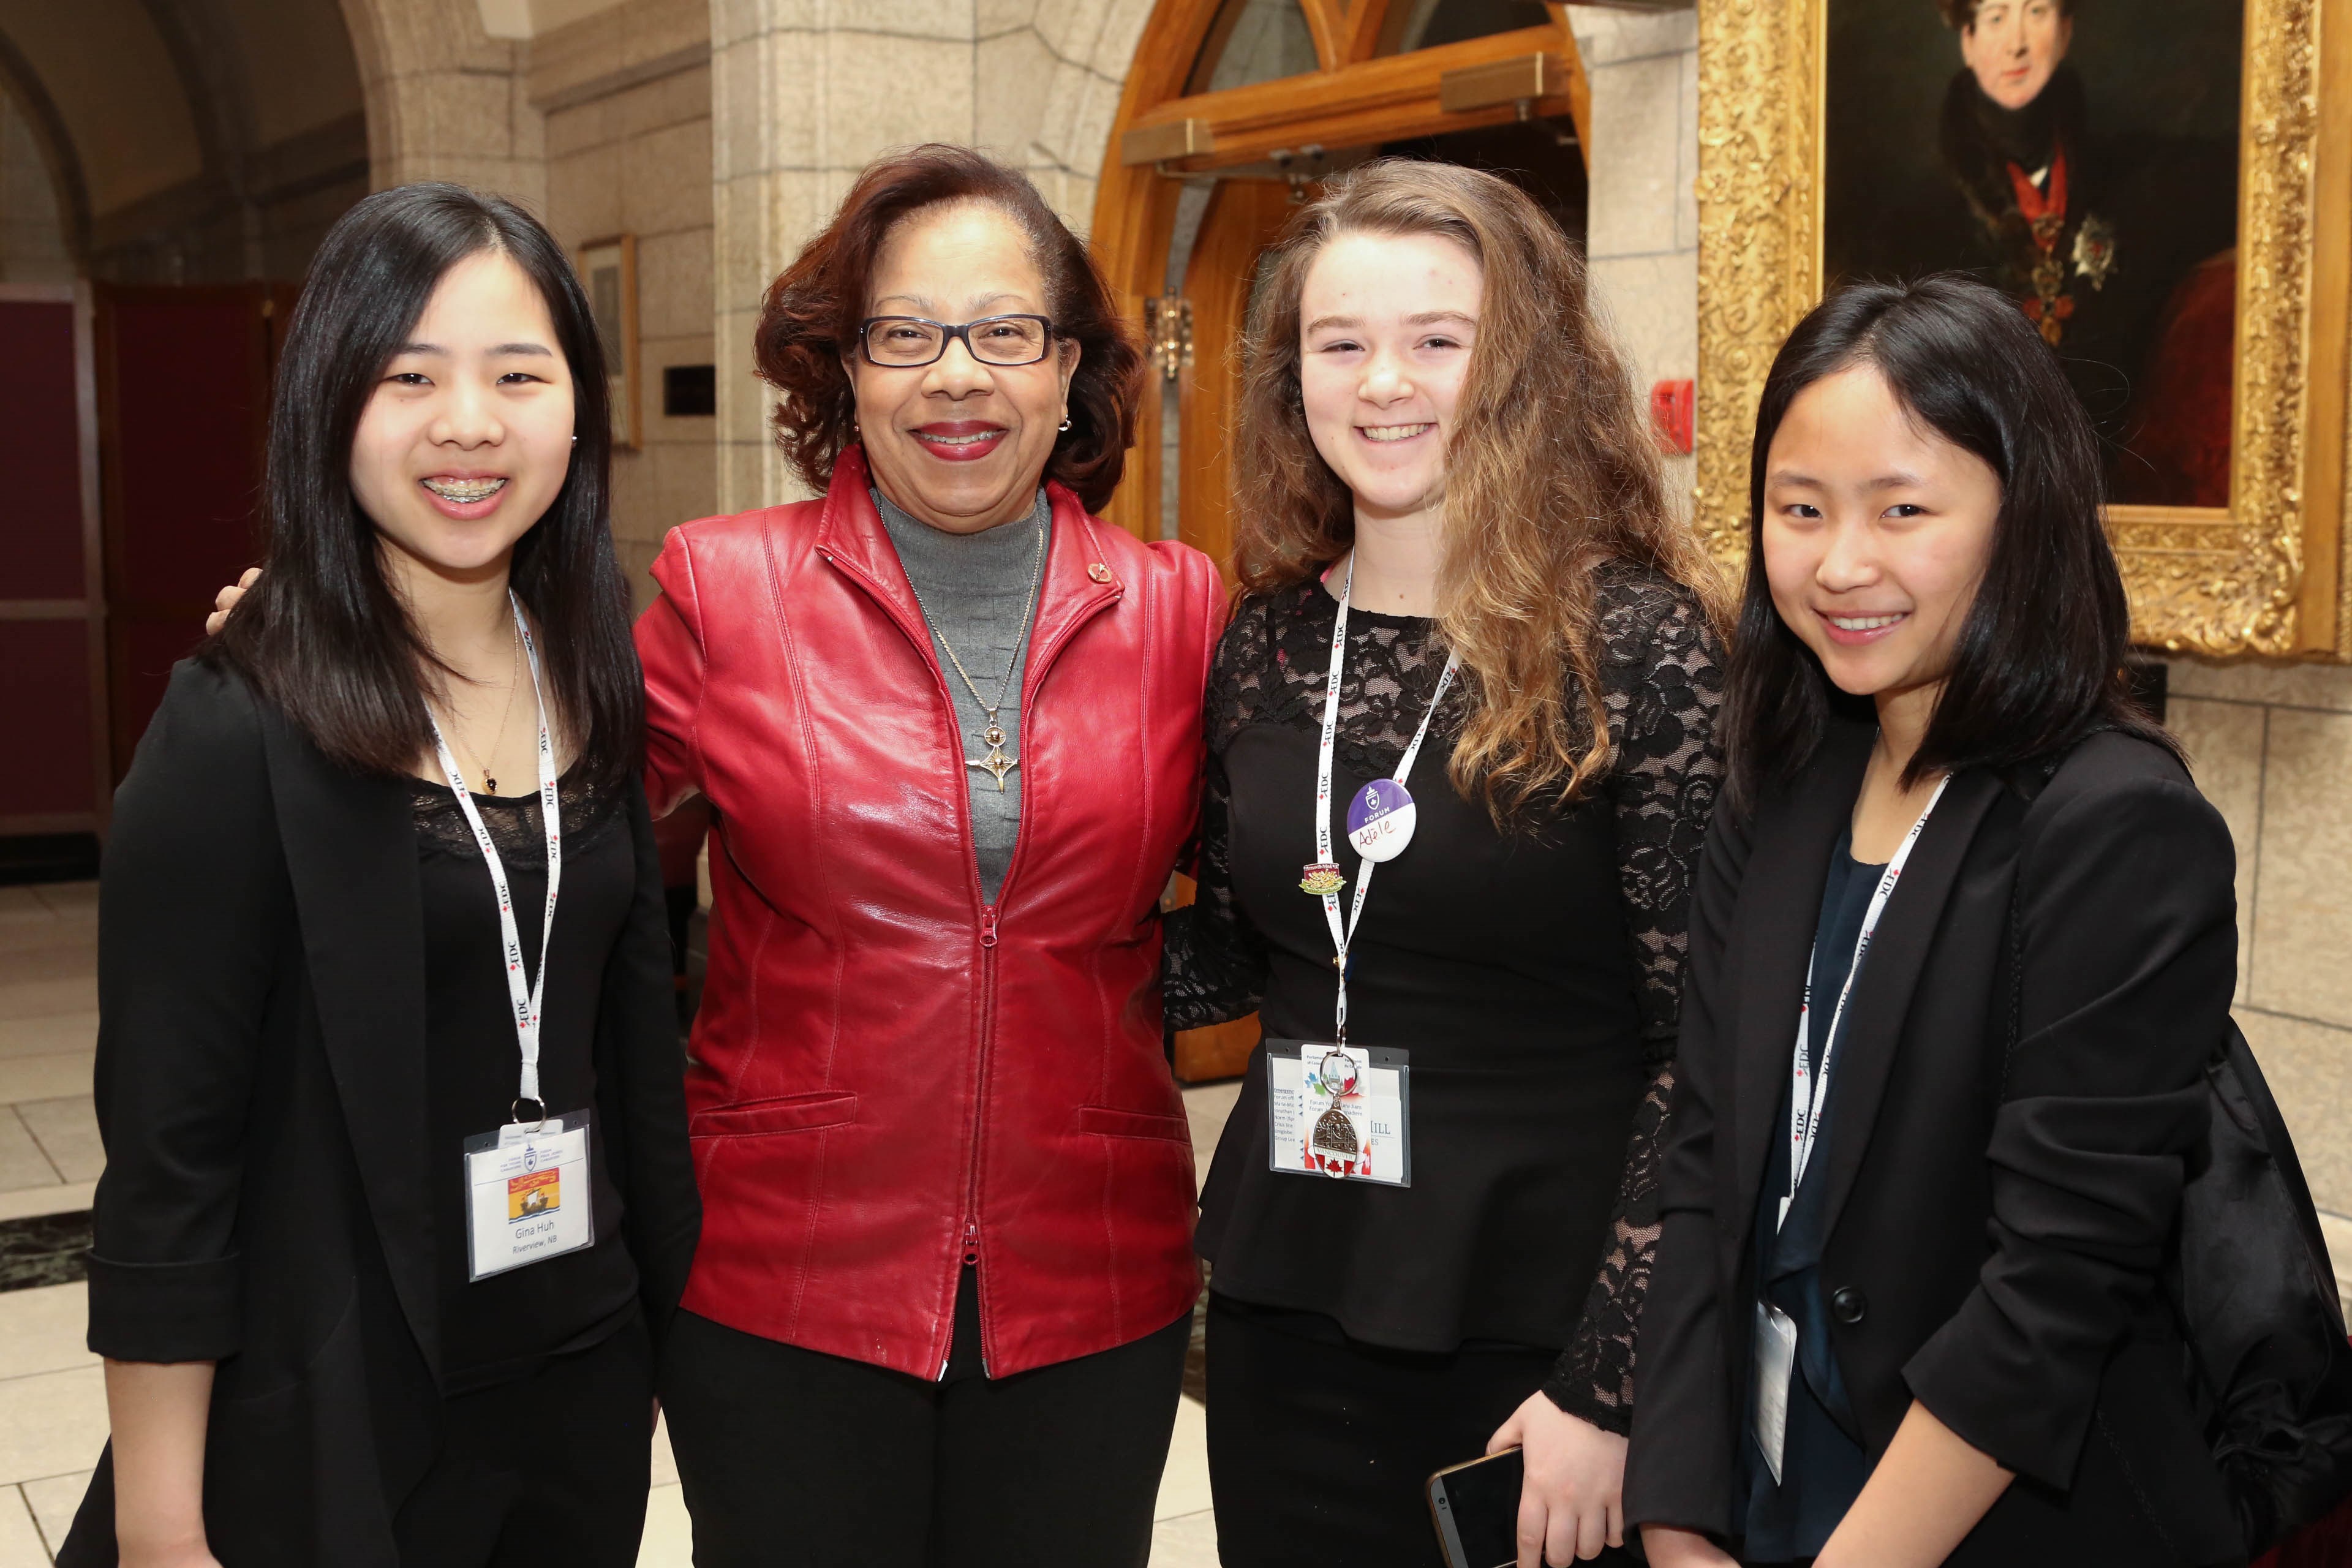 "Involved, engaged and proactive - Canada's youth stands as the best investment in the future of this country," says Senator Marie-Françoise Mégie.